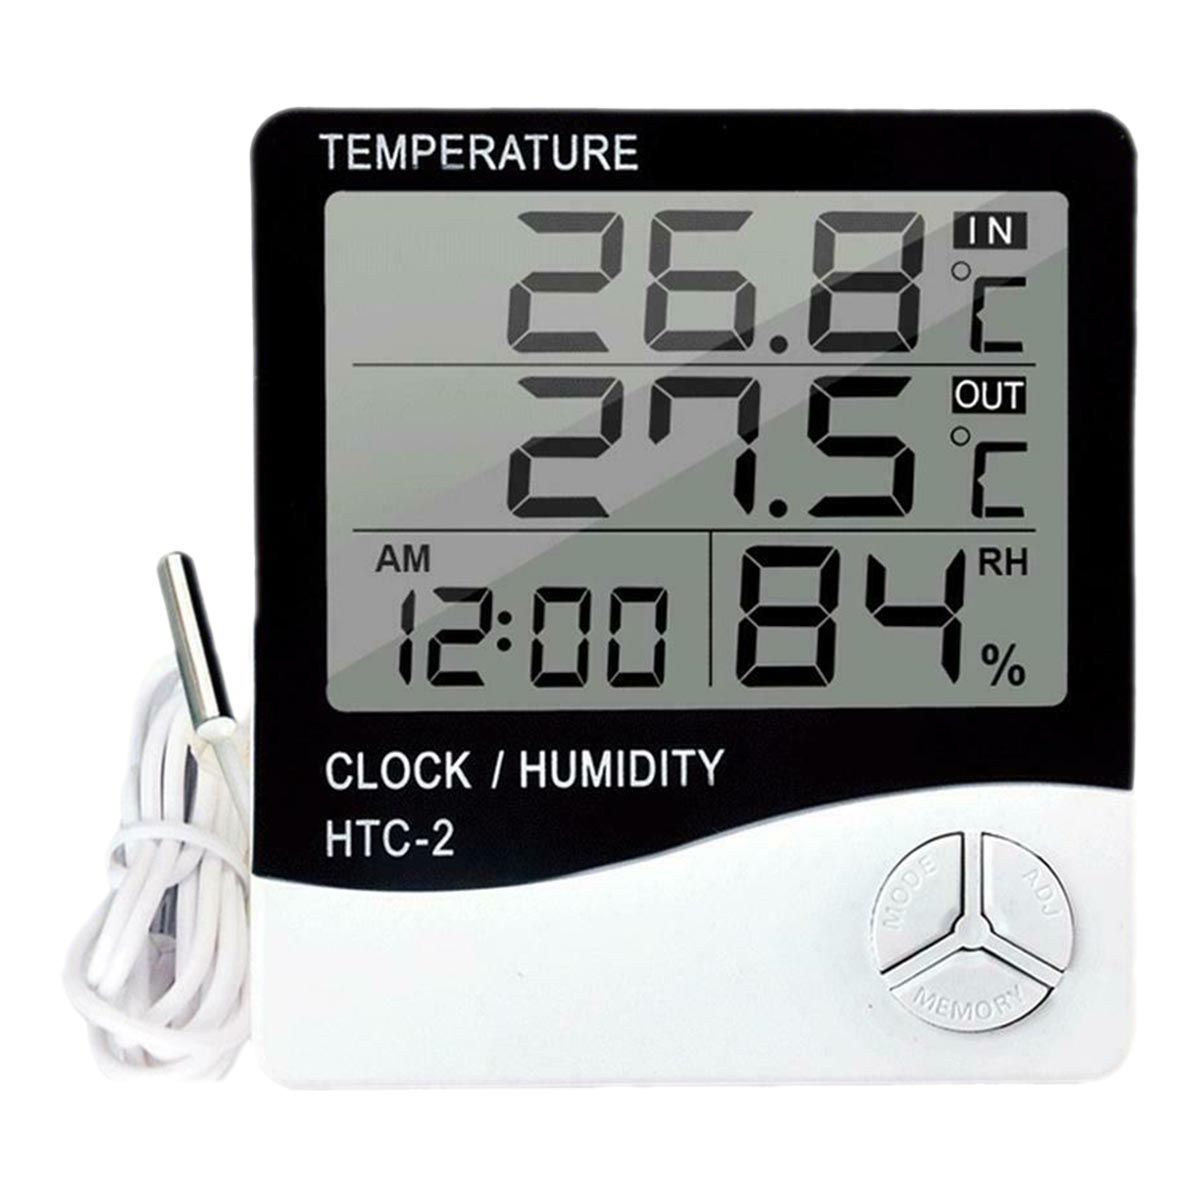 HTC-2 Digital LCD Temperature Humidity Meter Indoor / Outdoor Room  Thermometer Clock Hygrometer with sensor Greenhouse Room Indoor Thermometer  Monitor Clock Beep , Egg Incubator , Fish Tank Temperature Controlling